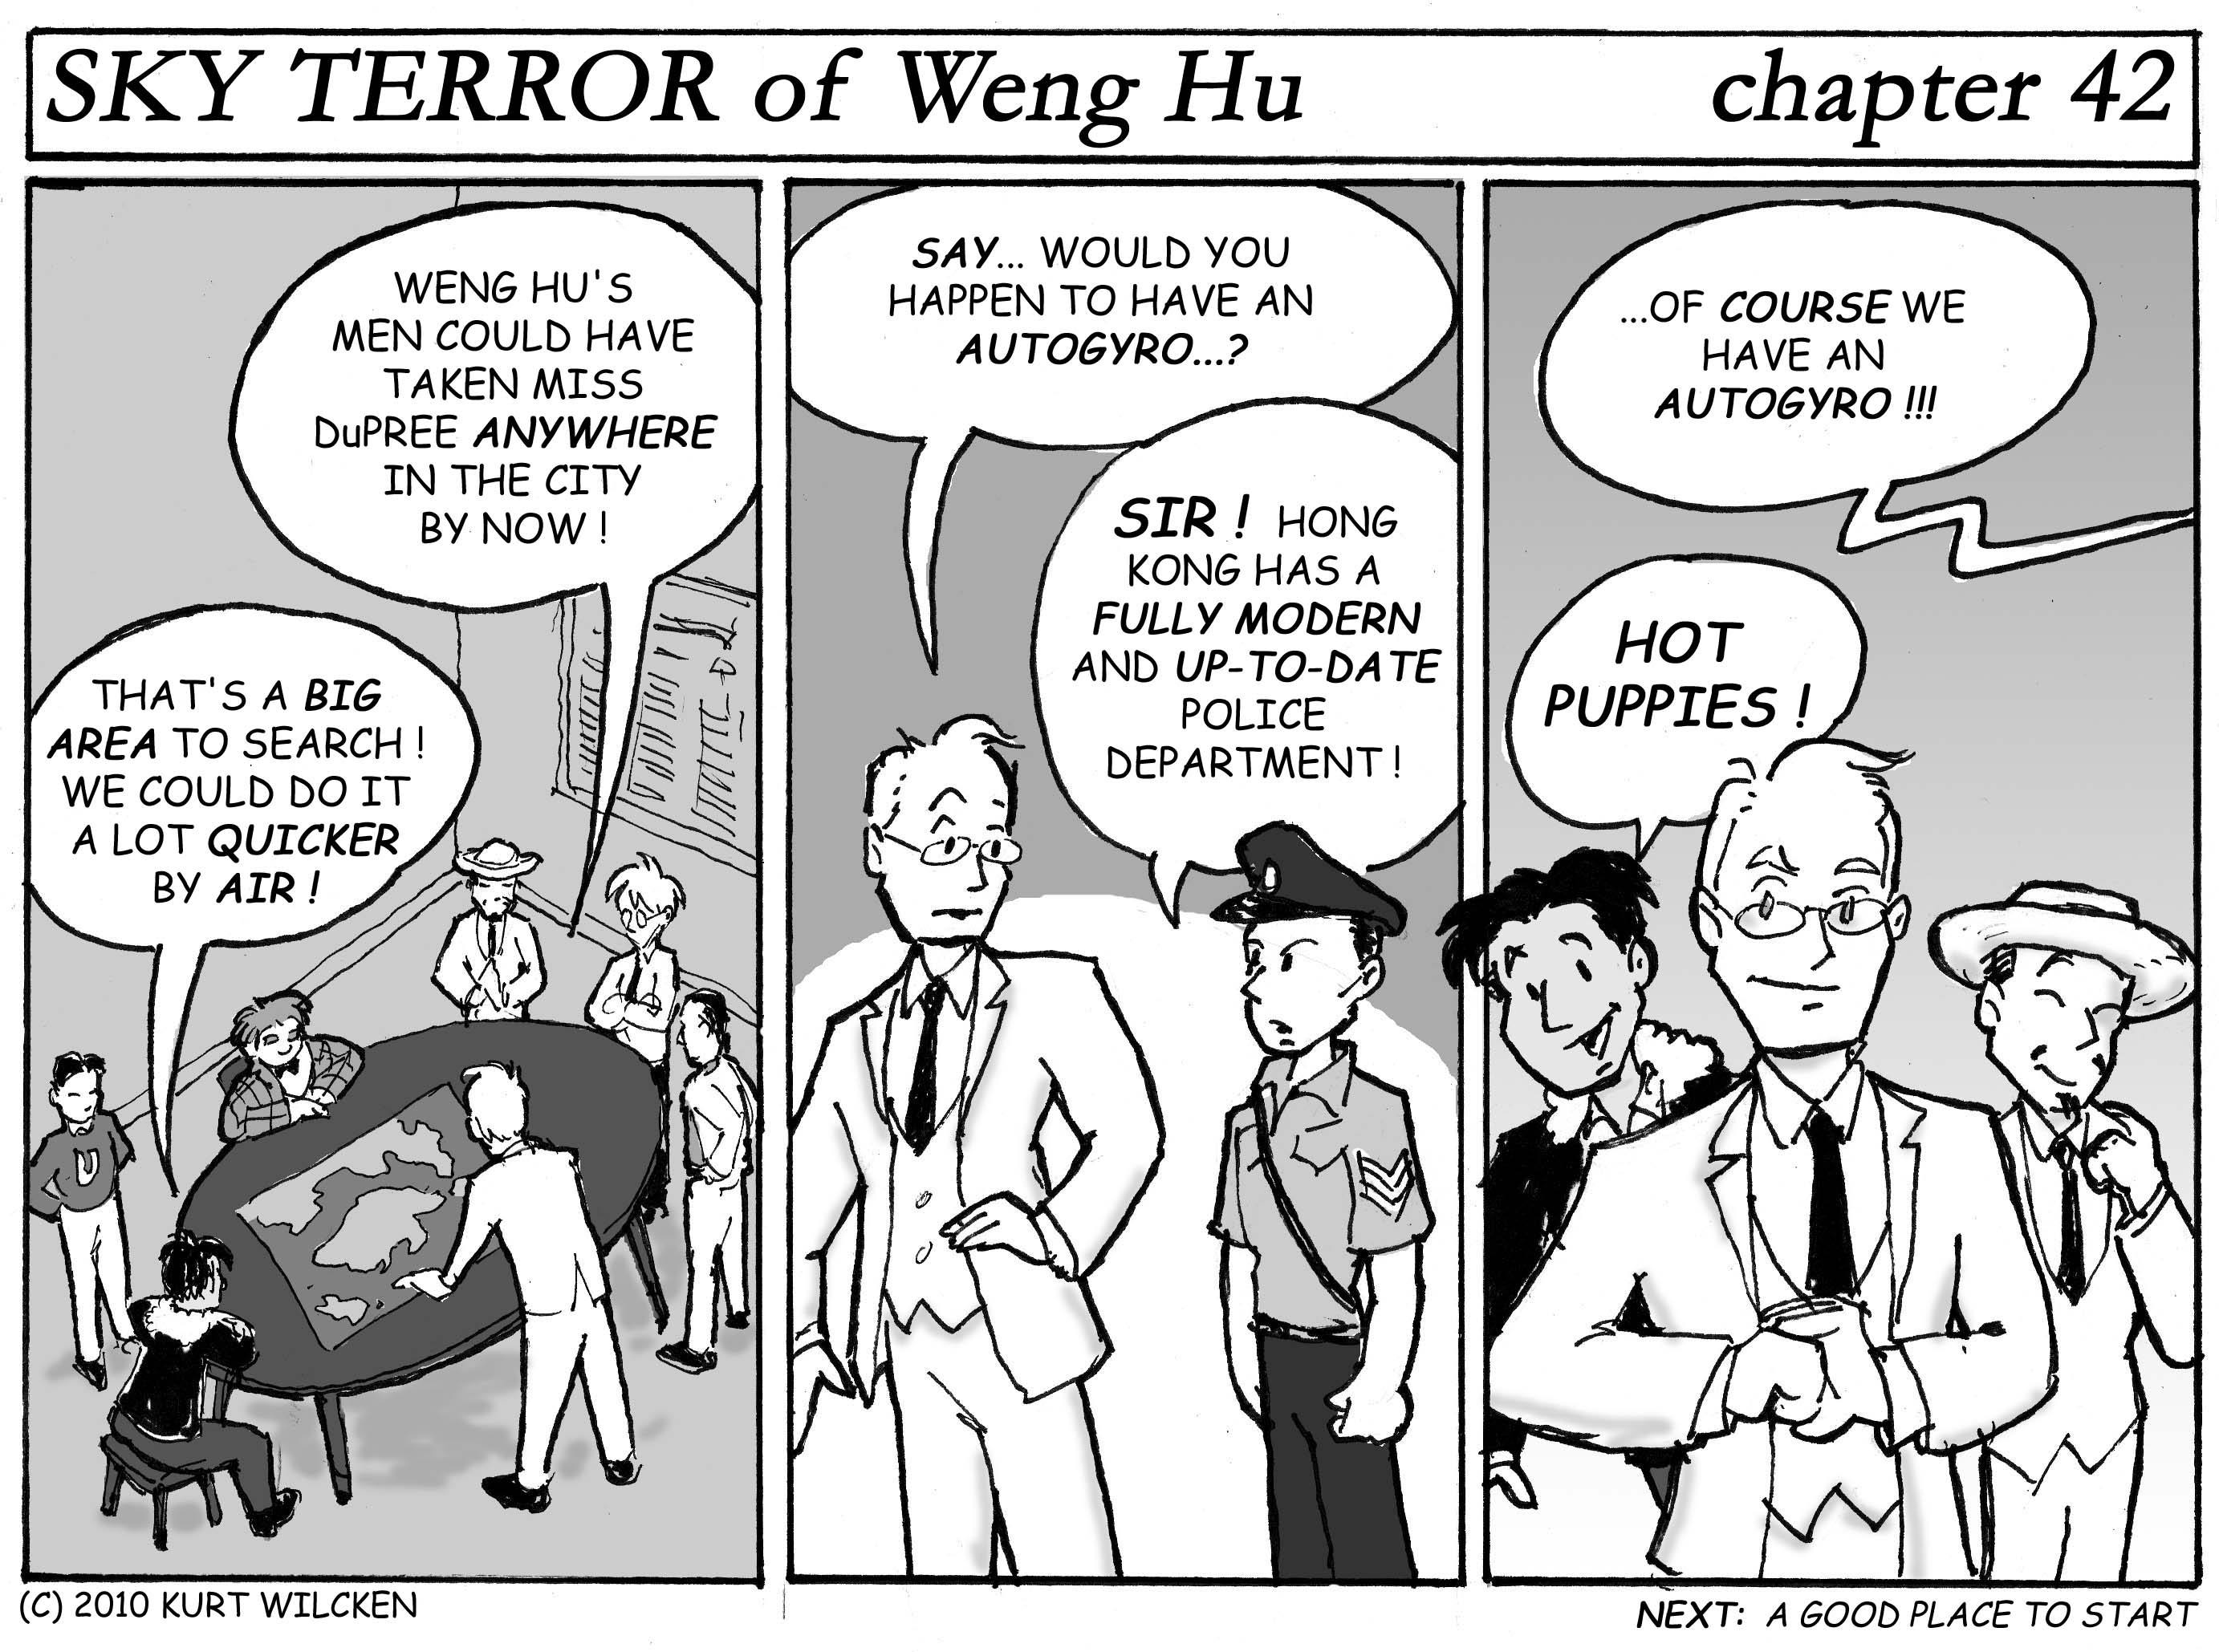 SKY TERROR of Weng Hu:  Chapter 42 — Doesn’t Everybody?